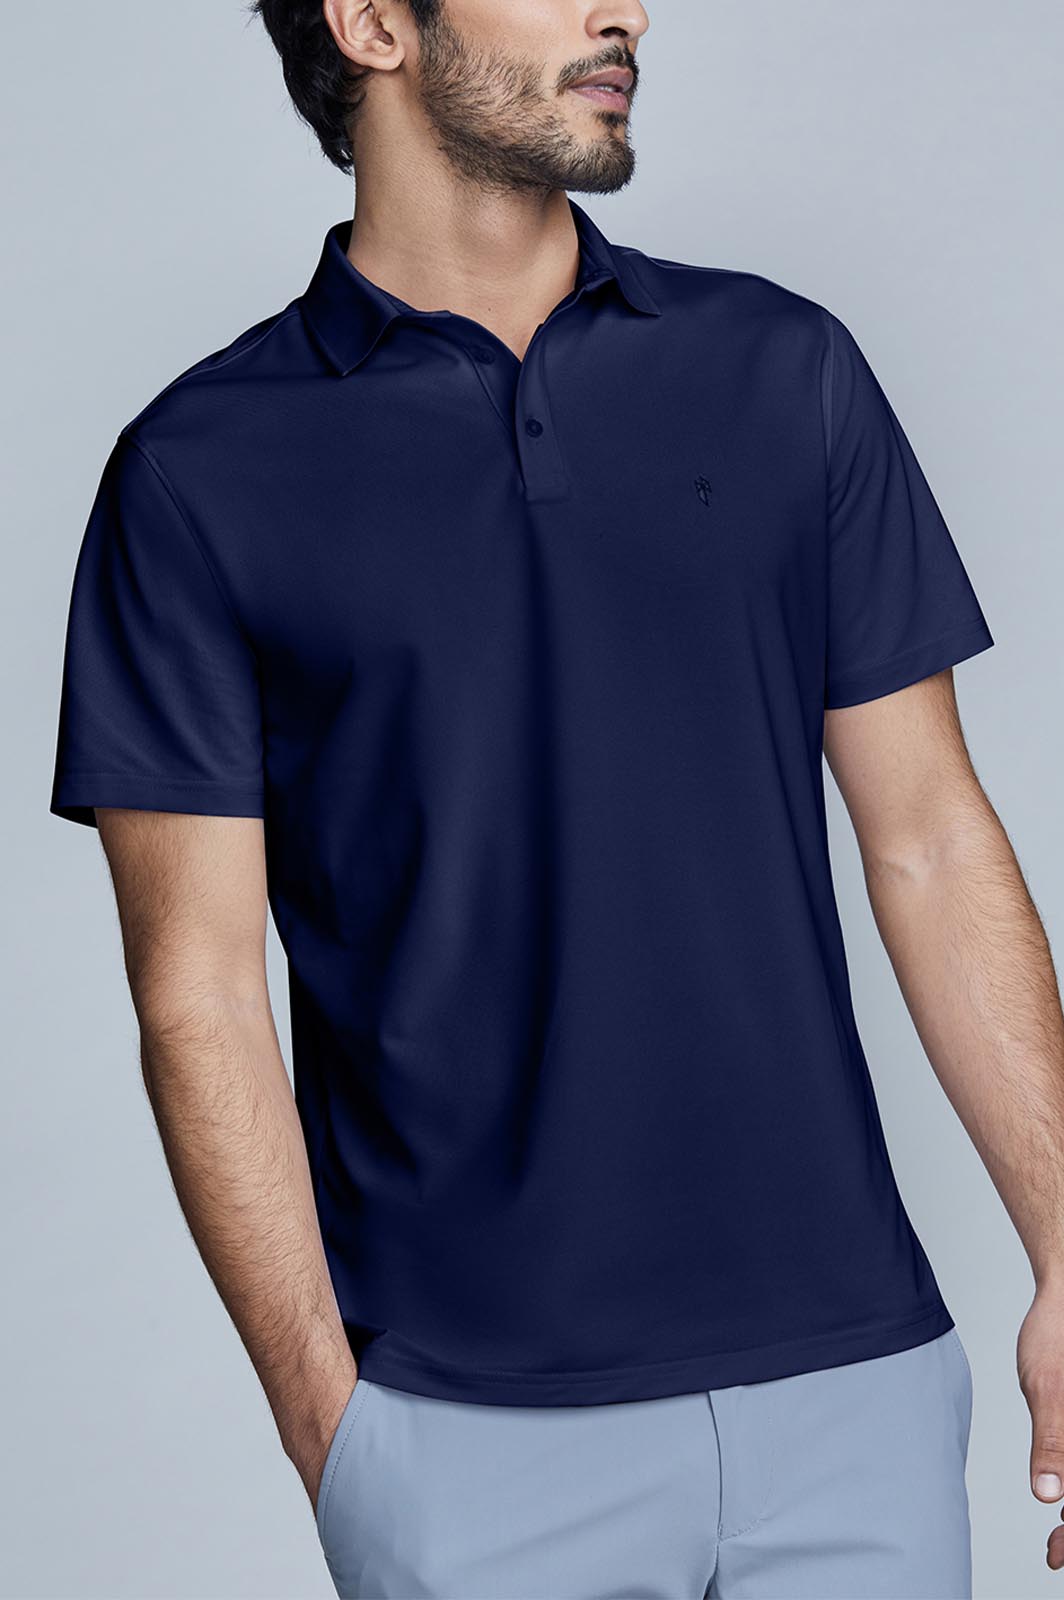 Sustainable Navy Polo Shirt Men's - State of Matter Apparel